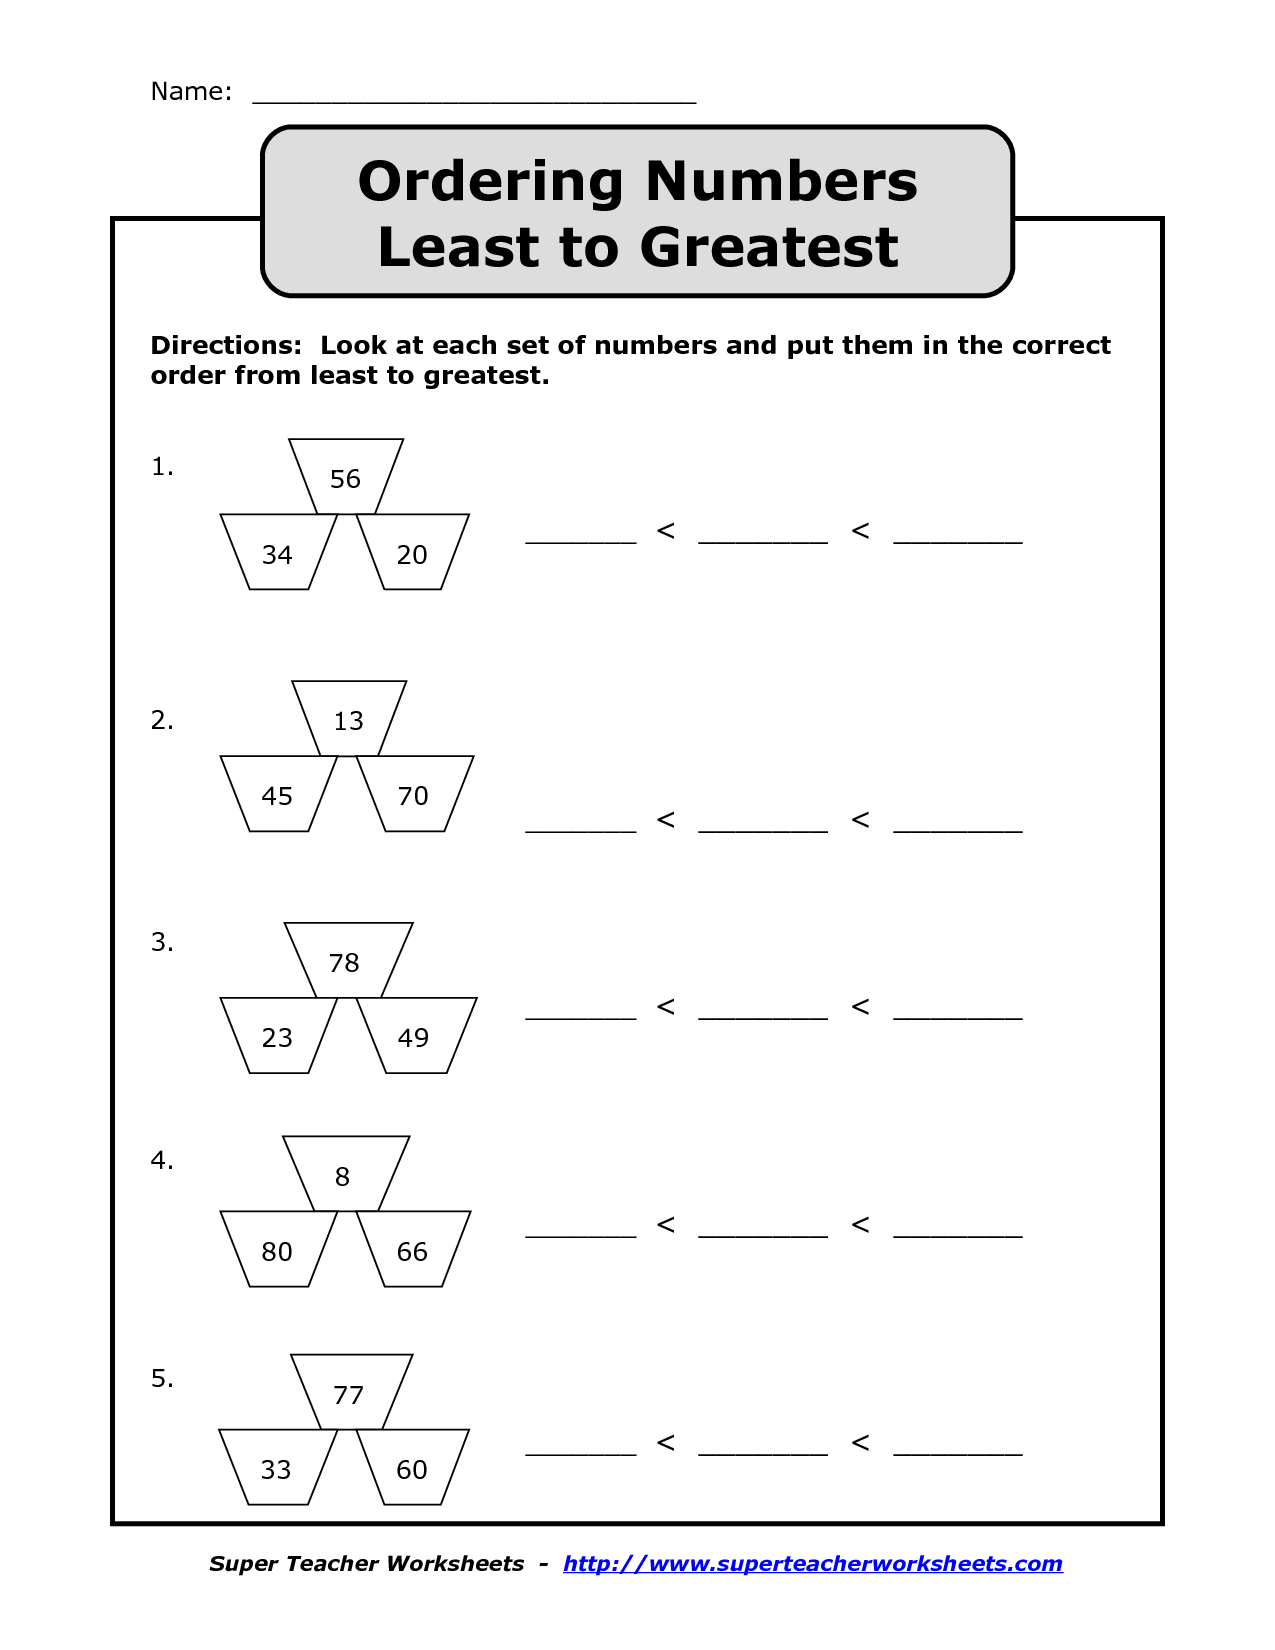 6-best-images-of-number-order-least-to-greatest-worksheets-numbers-from-least-to-greatest